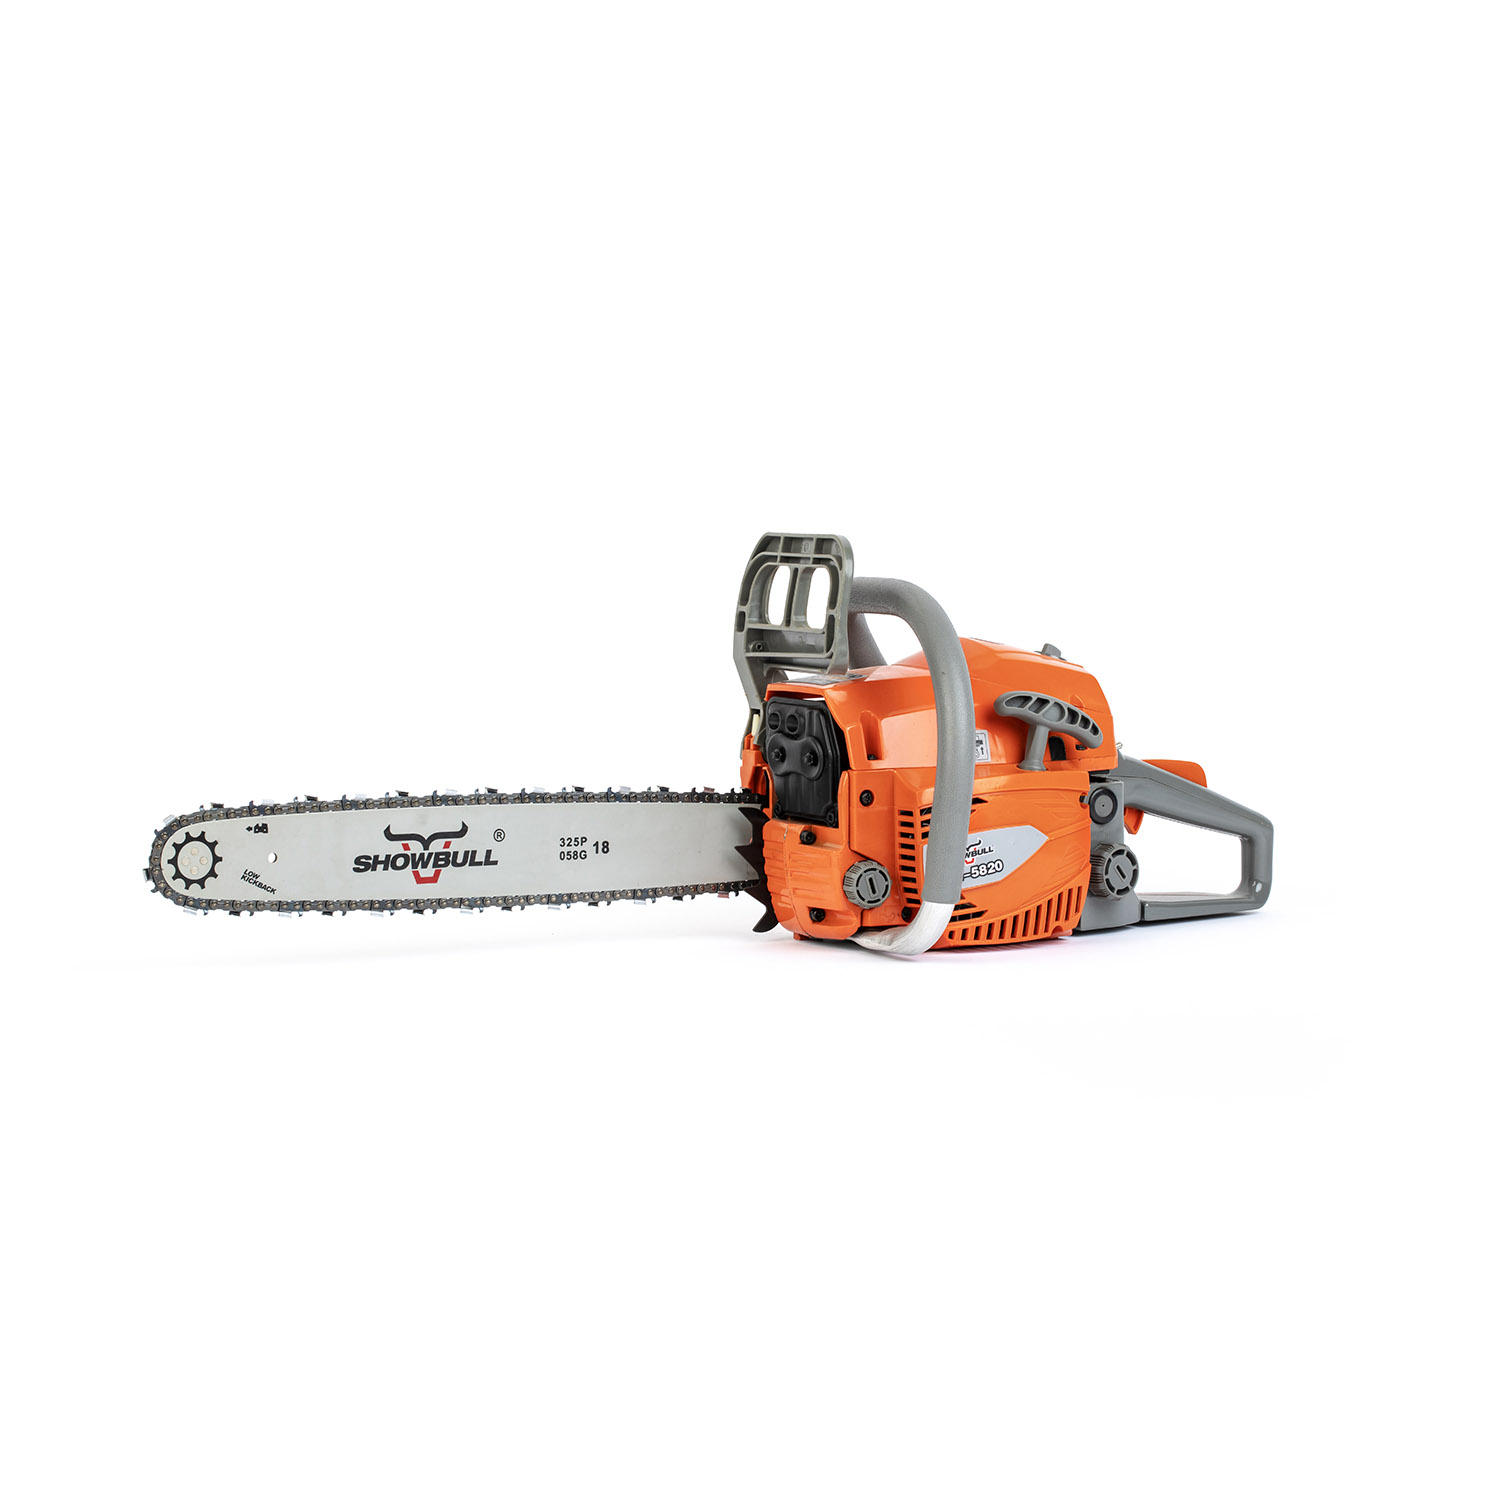 Hot Selling Agriculture Tool Nice Design with High Quality 52cc Gasoline Chain Saw 5820